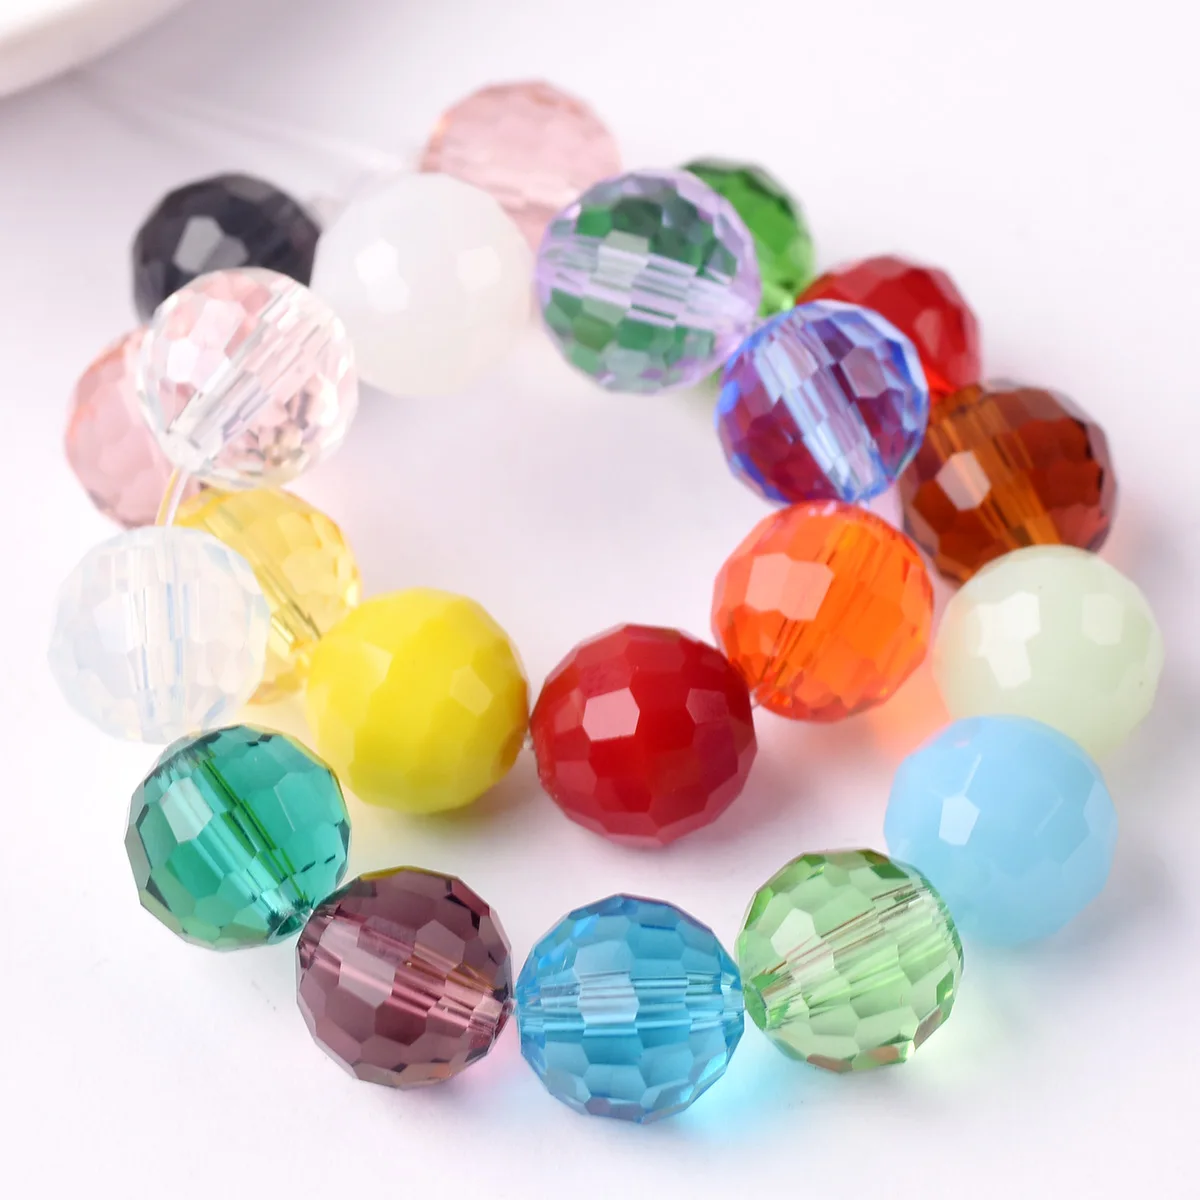 Round 96 Facets 6mm 8mm 10mm 12mm Faceted Crystal Glass Loose Spacer Beads Wholesale Bulk Lot For Jewelry Making Findings scott volumeter bulk density tester lab equipment metallic powders apparent loose density meter